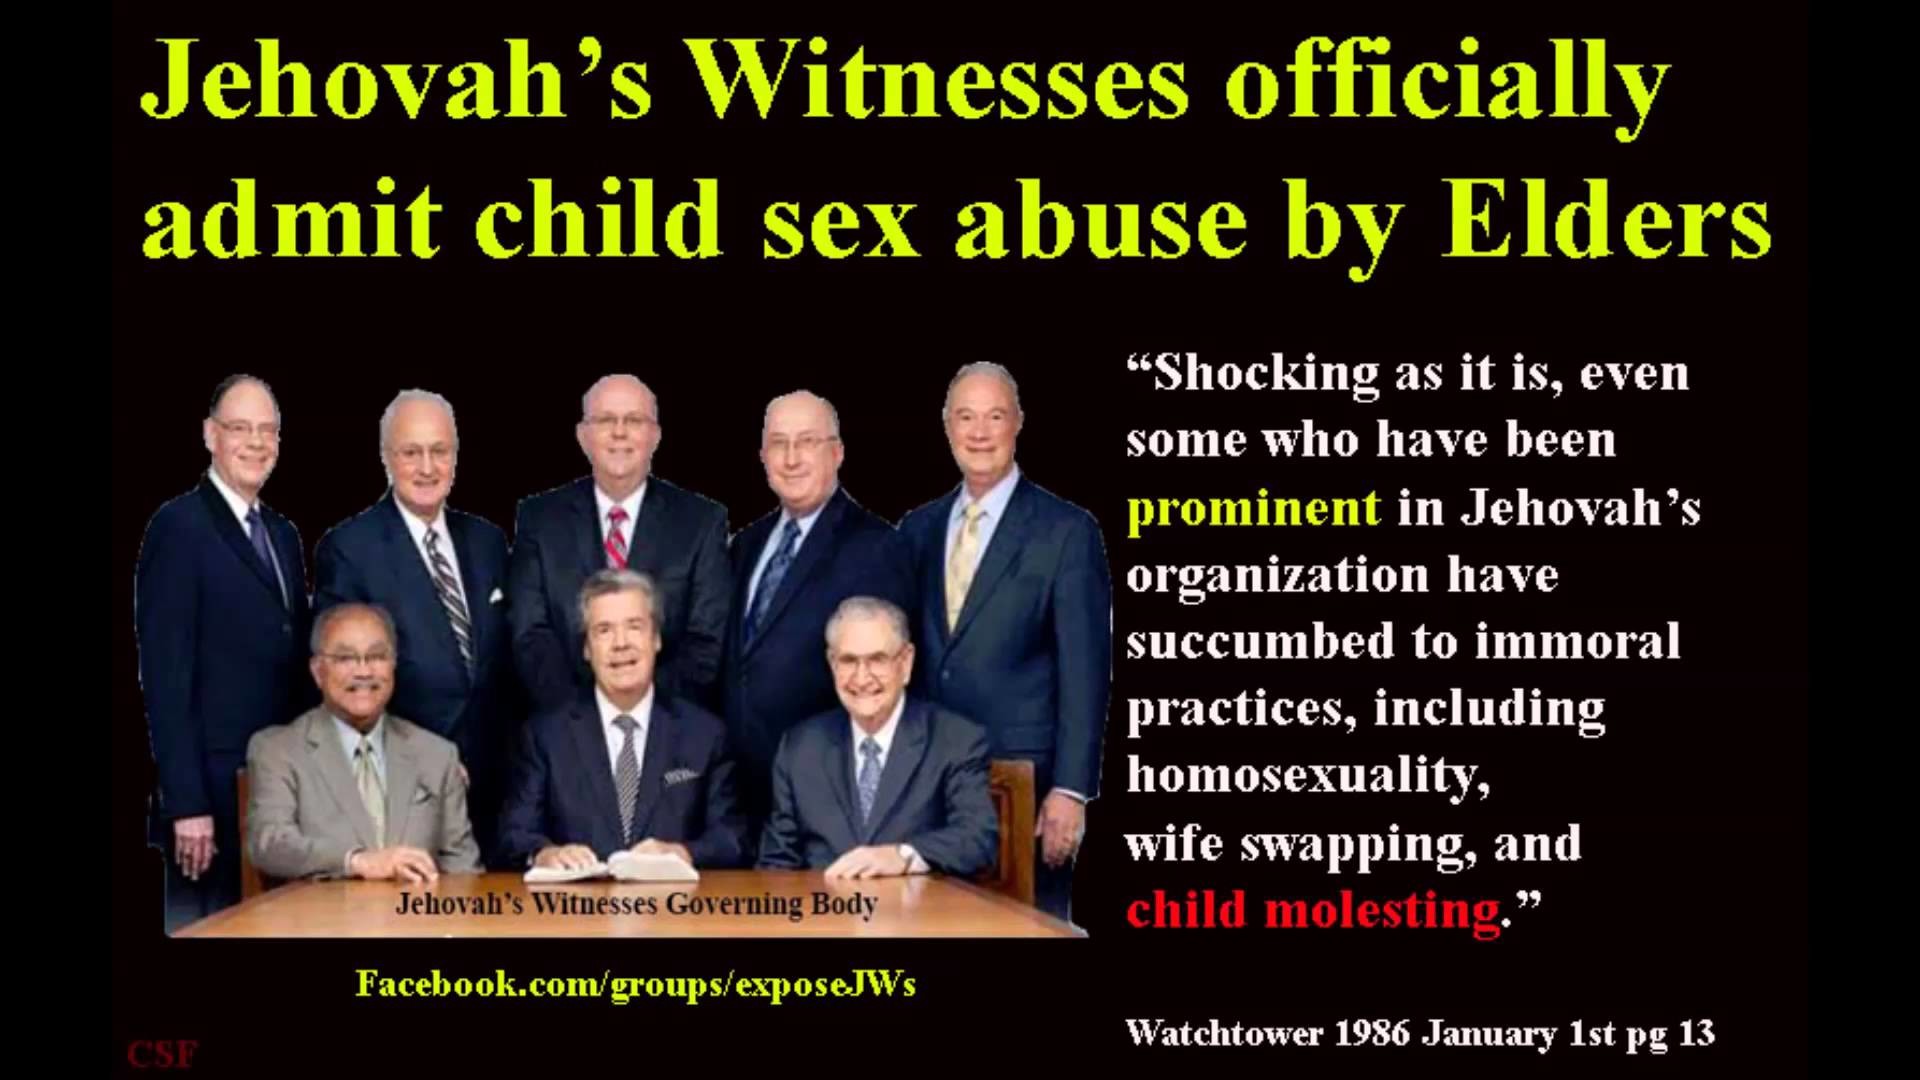 1920x1080 Jehovah's Witnesses Officially Admit Child Sex Abuse by Elders